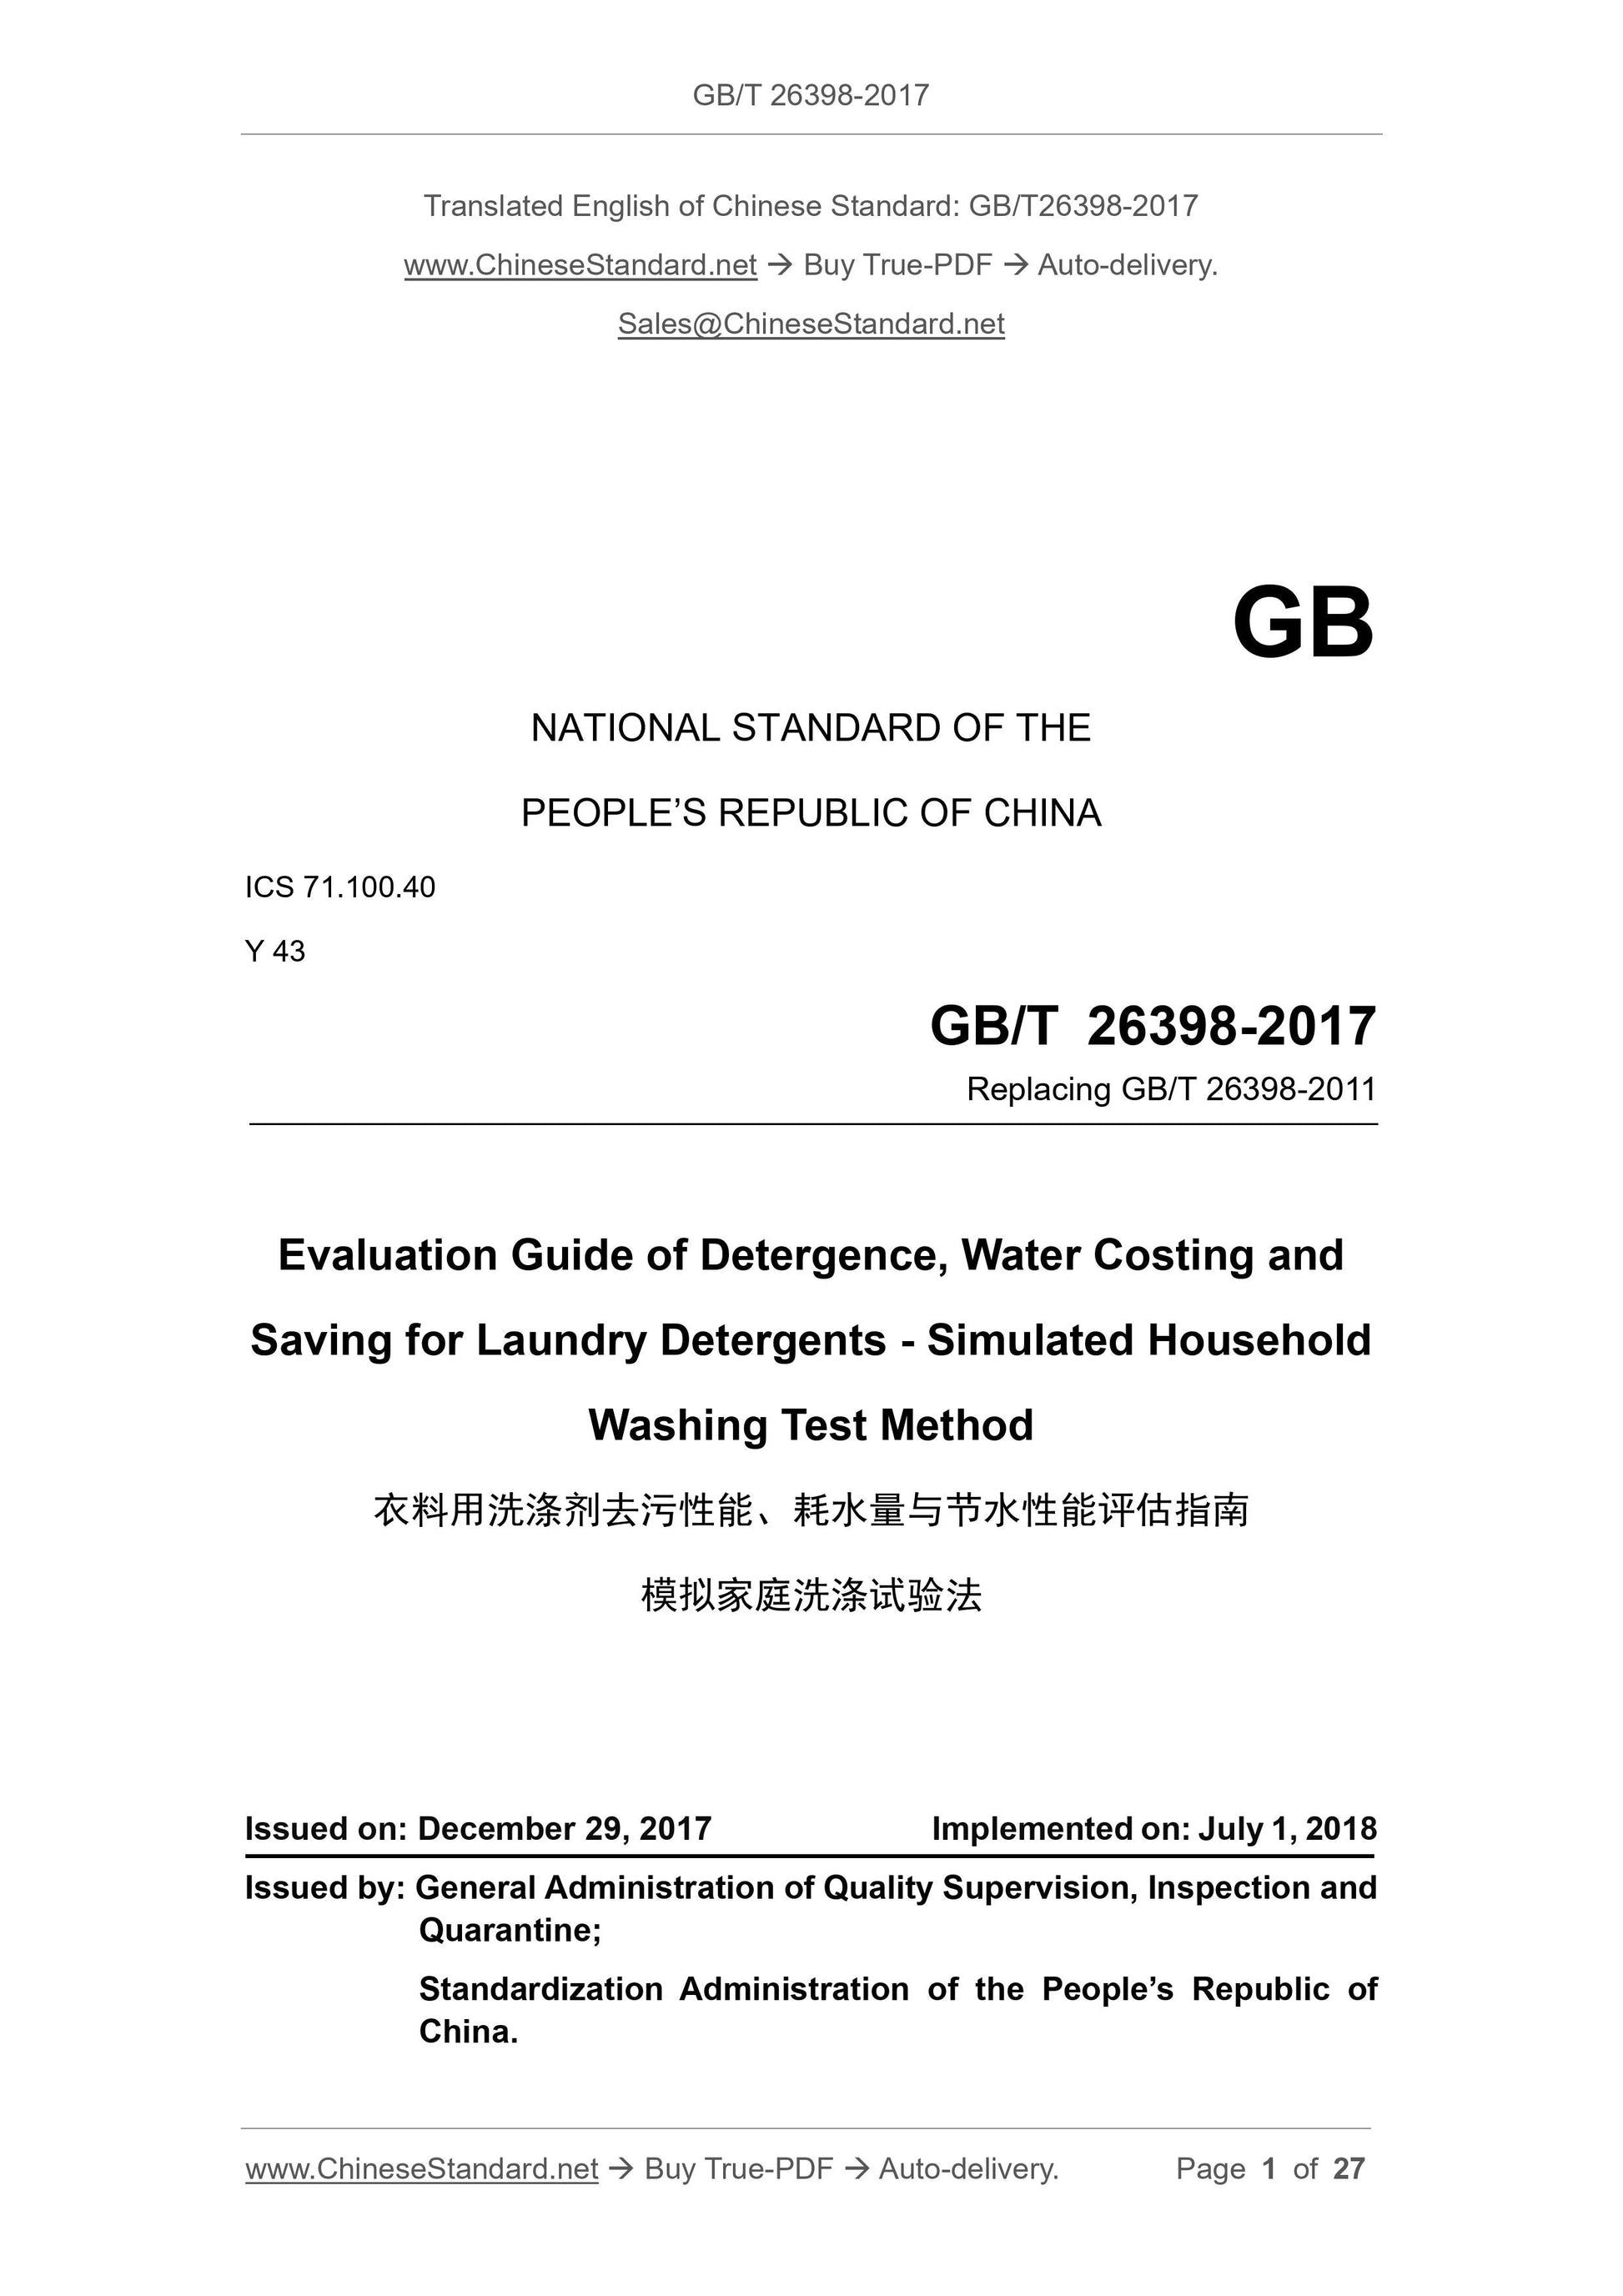 GB/T 26398-2017 Page 1